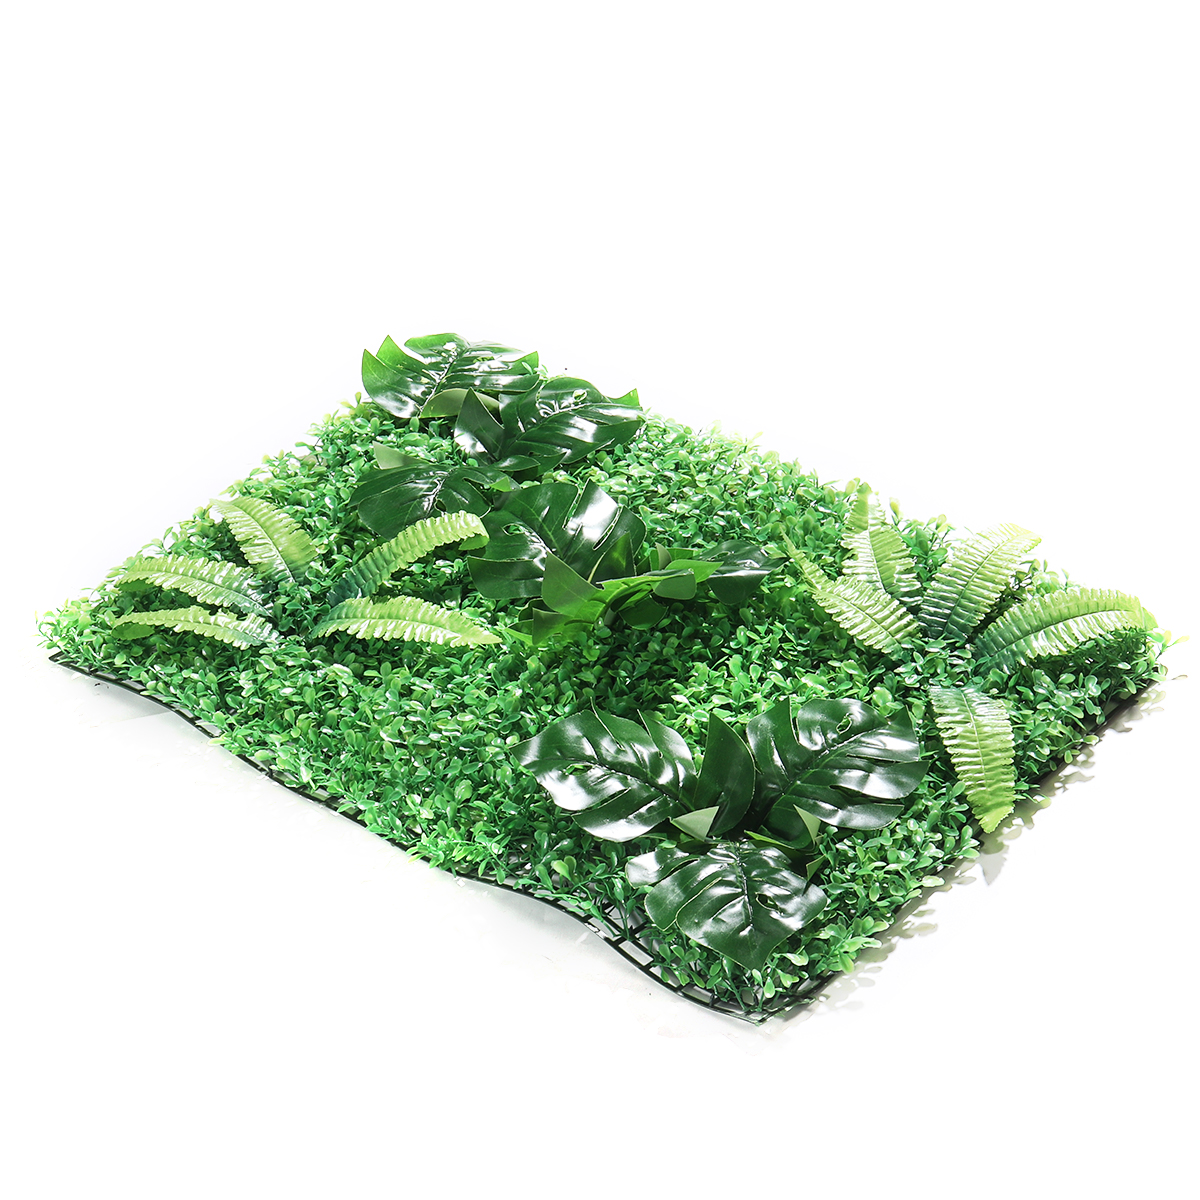 Artificial-Plant-Wall-Topiary-Hedges-Panel-Plastic-Faux-Shrubs-Fence-Mat-1712175-6